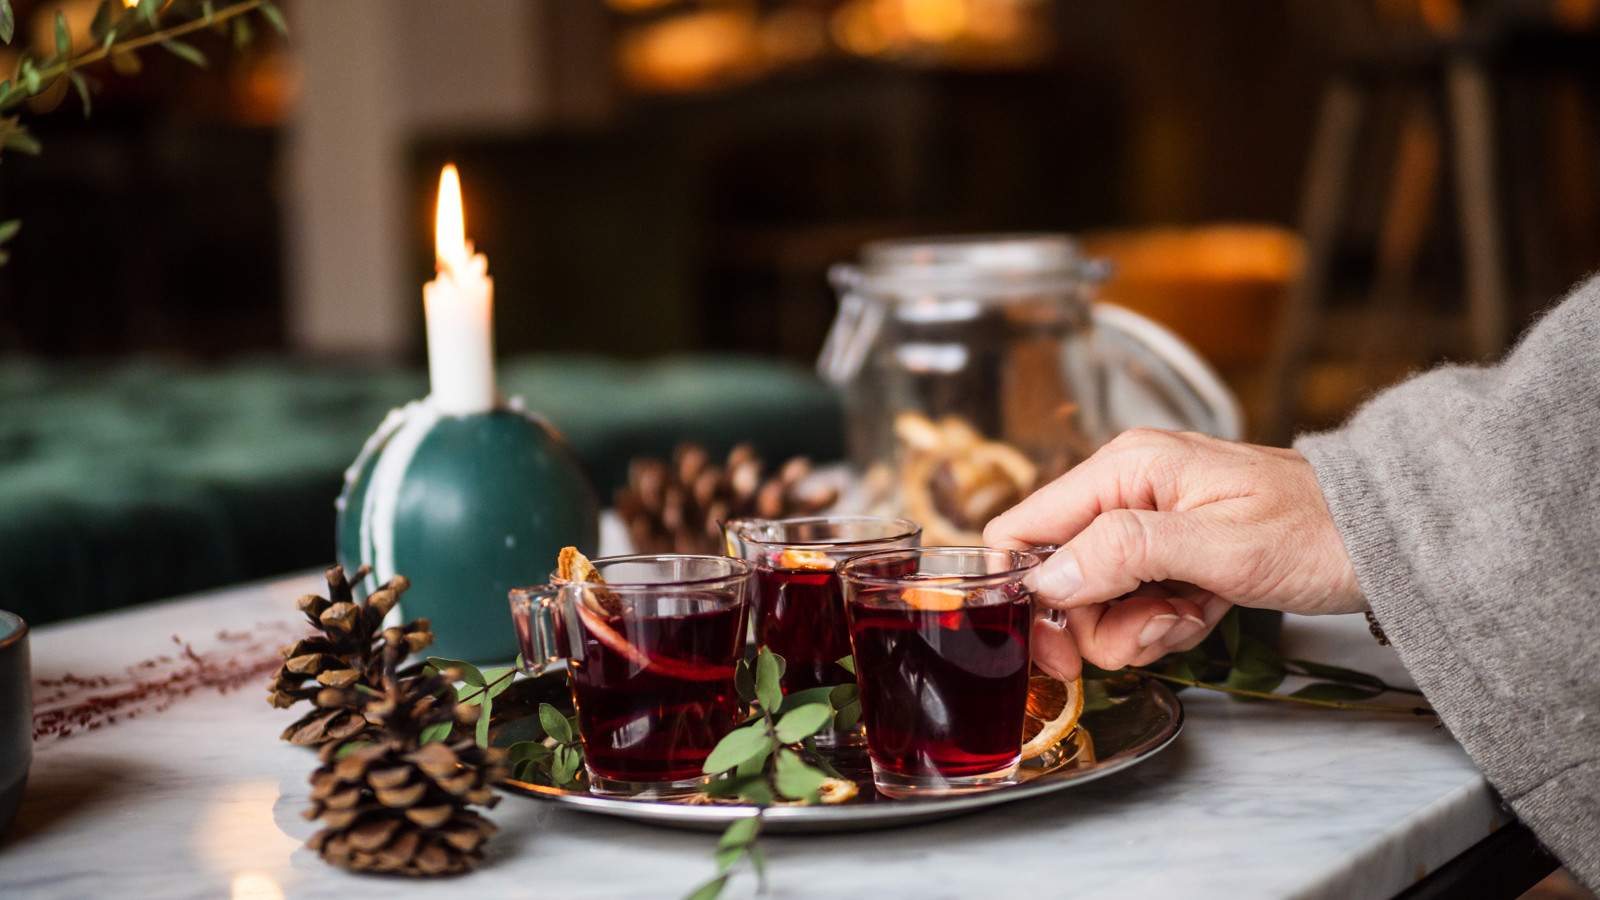 A hand reaching for a glass of mulled wine standing on a golden tray